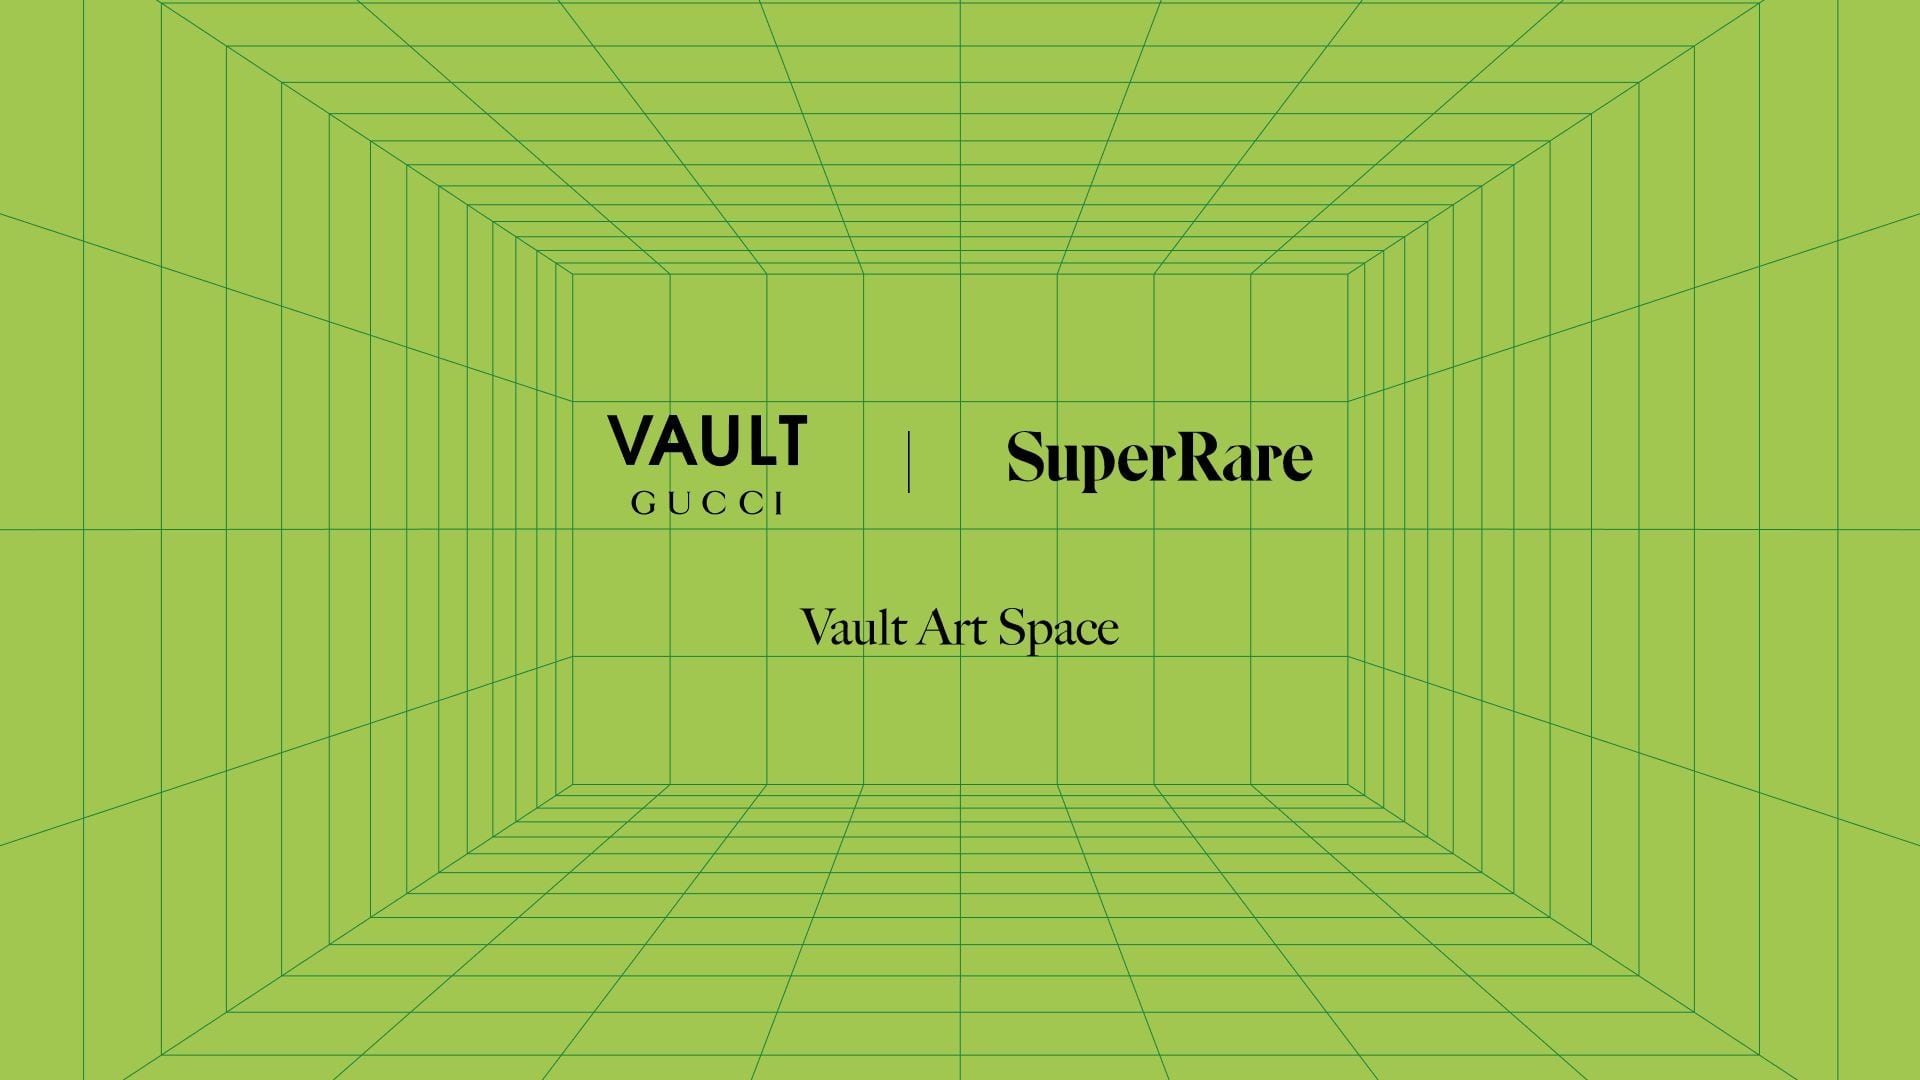 The high-end luxury fashion house has purchased $25,000 worth of RARE tokens to launch a digital “Vault Art Space.” (Gucci x SuperRare, courtesy of SuperRare)